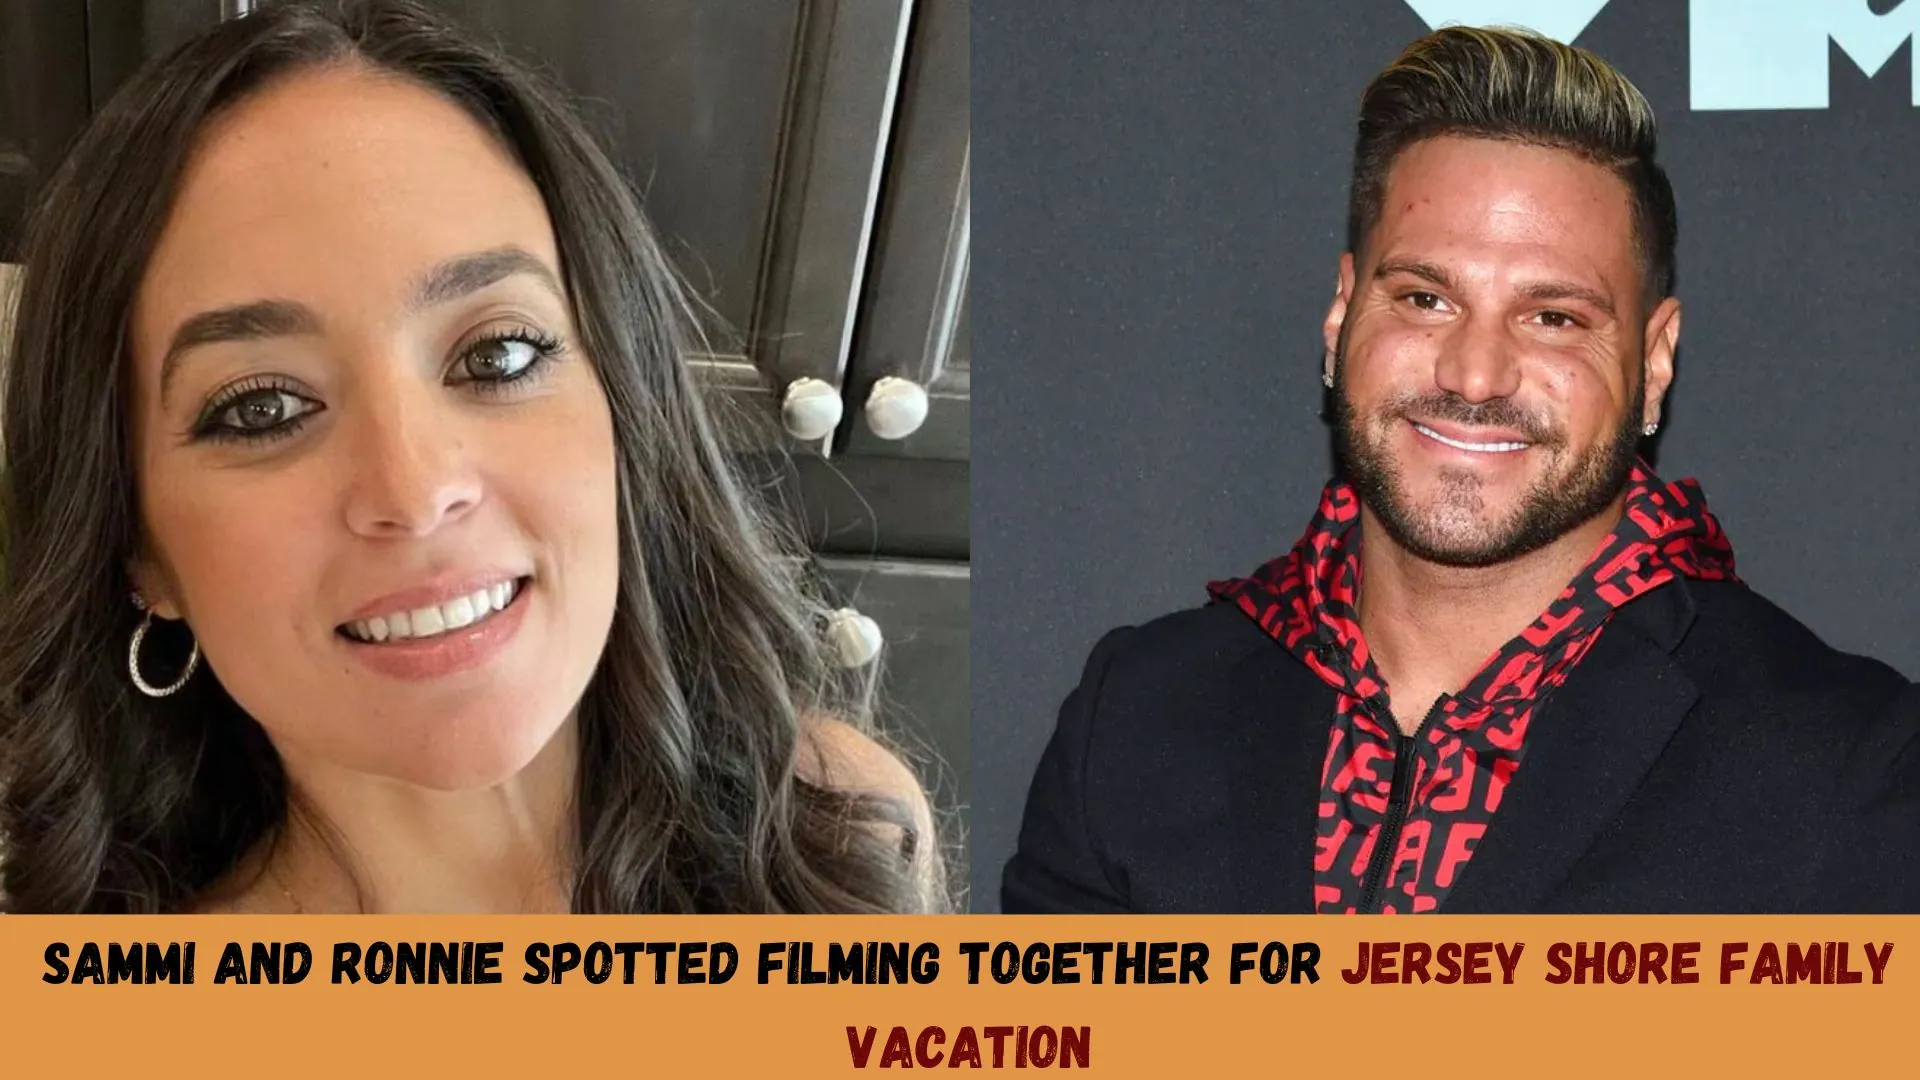 Sammi and Ronnie Spotted Filming Together for Jersey Shore Family Vacation